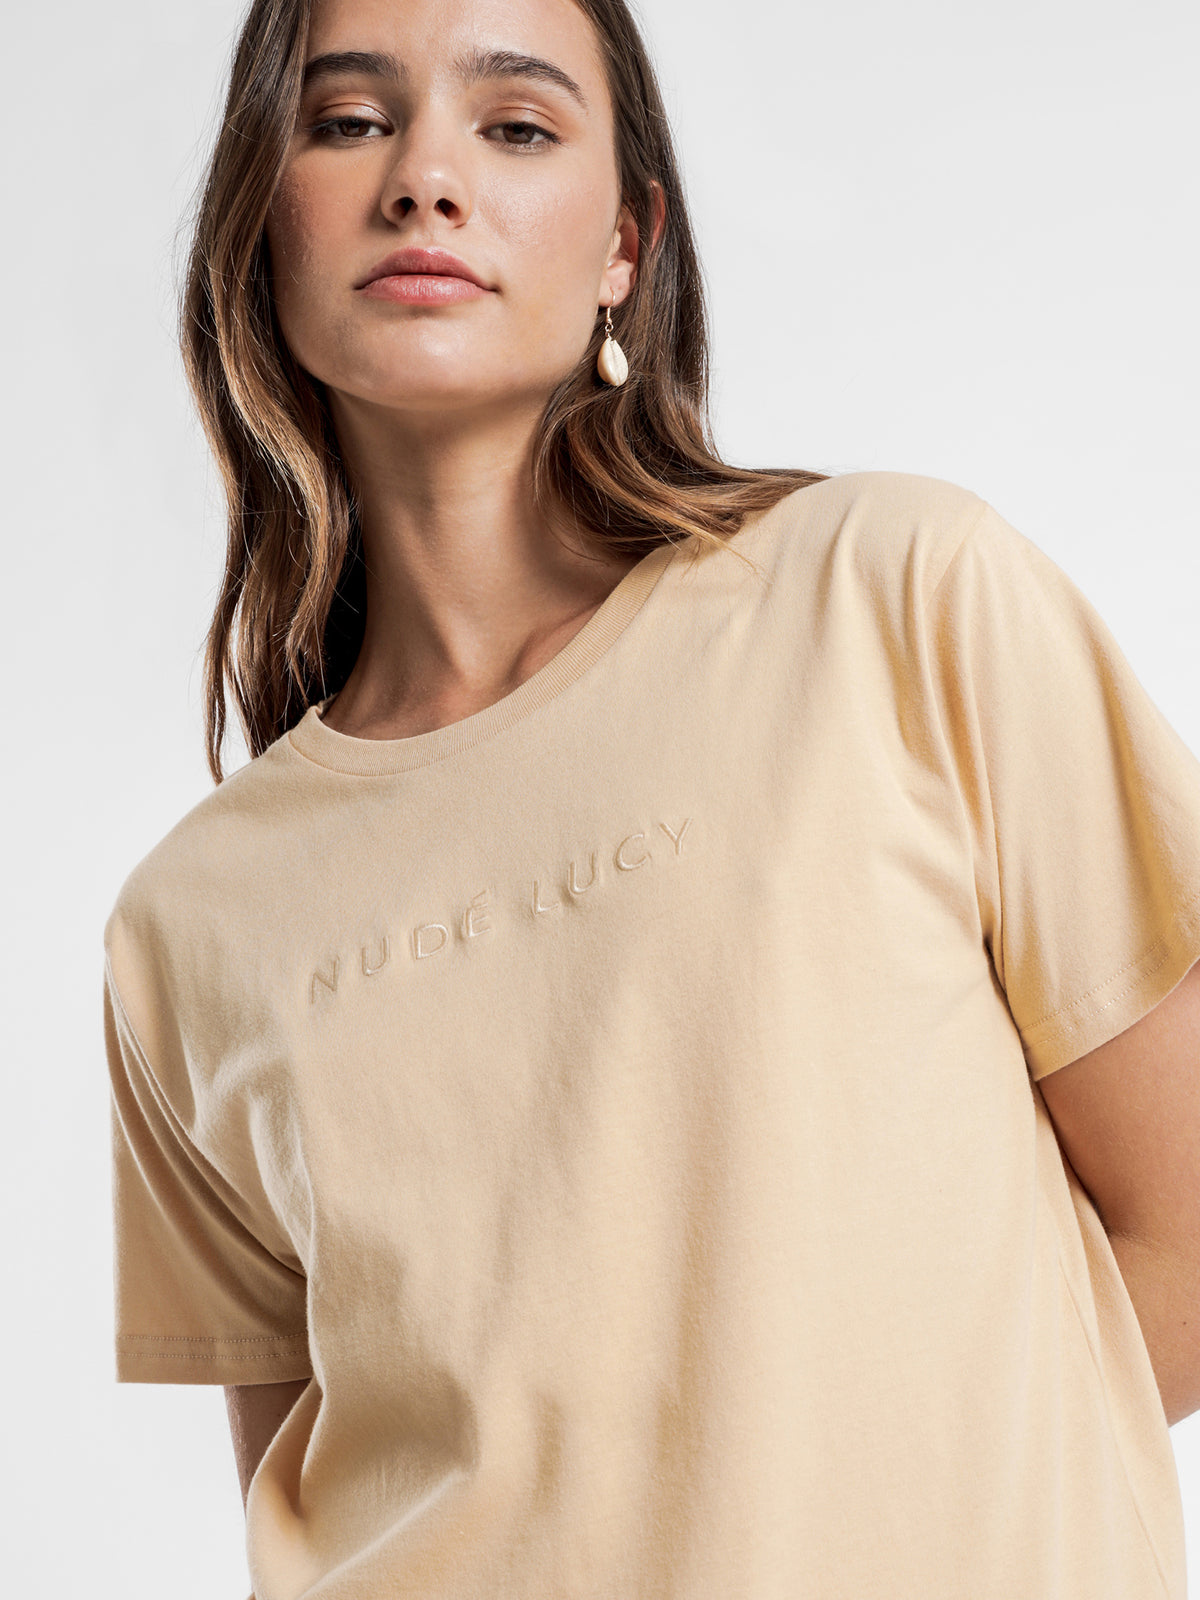 Embroidered Slogan T-Shirt in Apricot